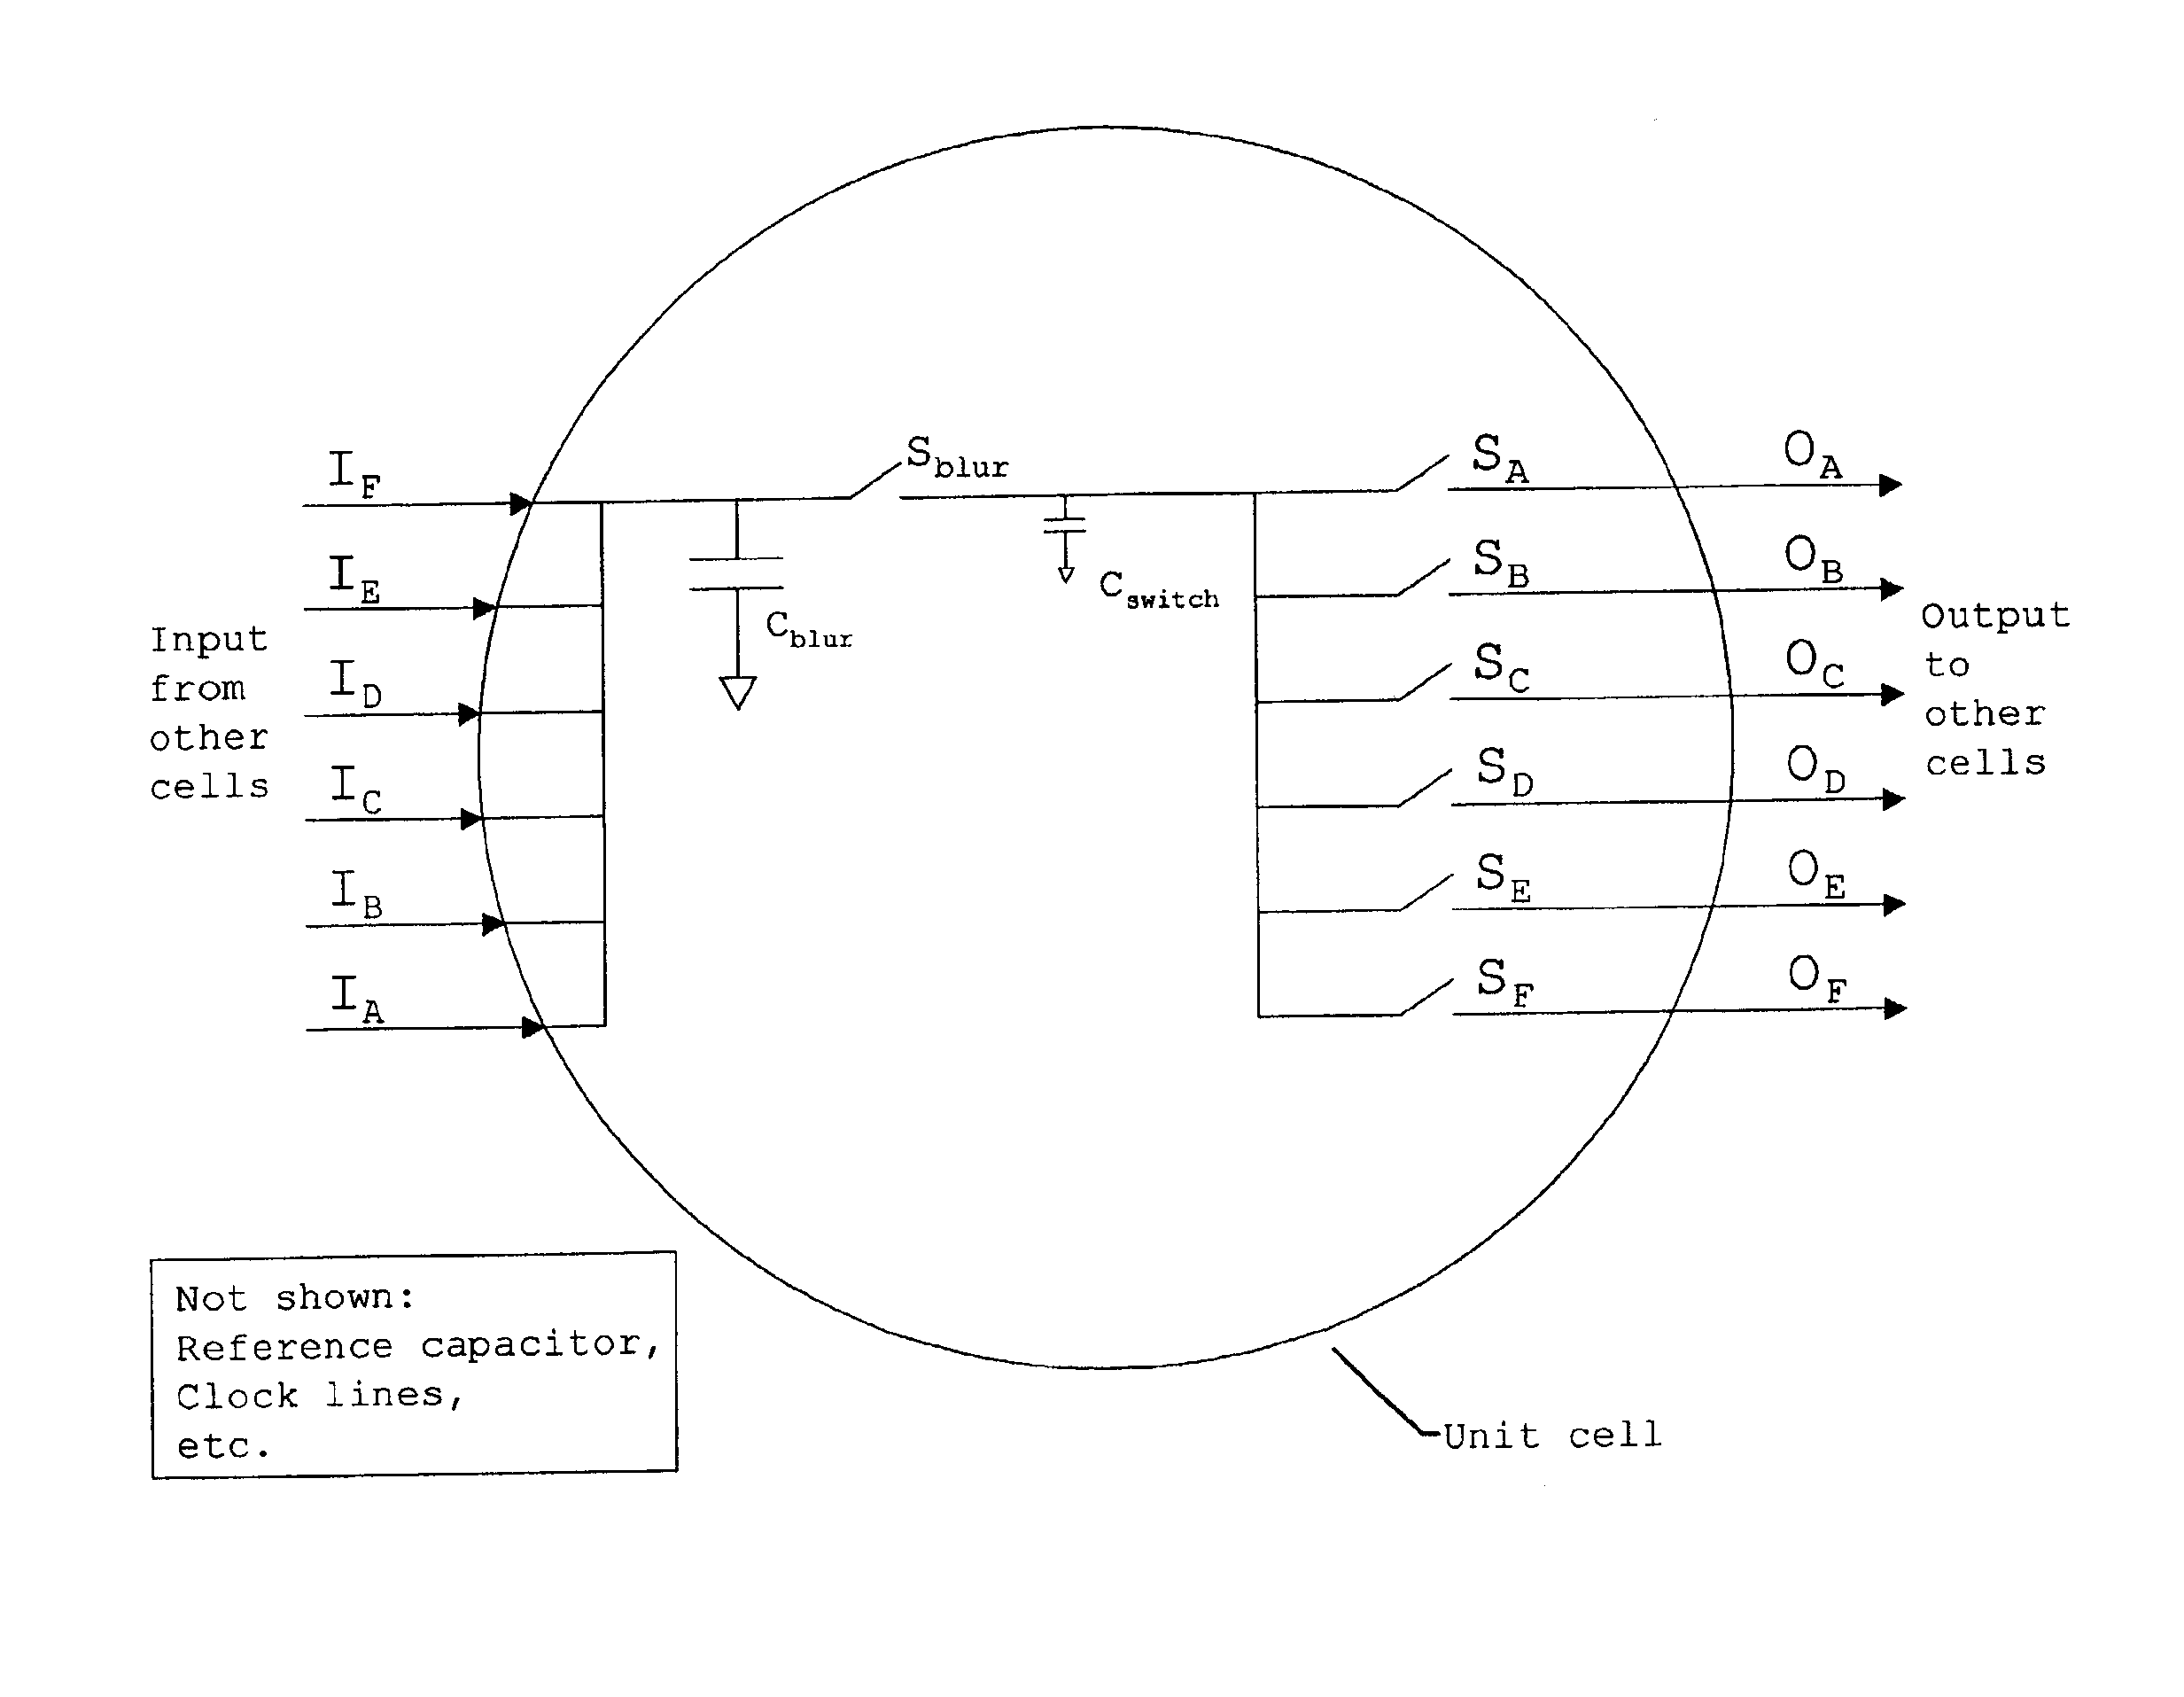 Spatio-temporal filter and method